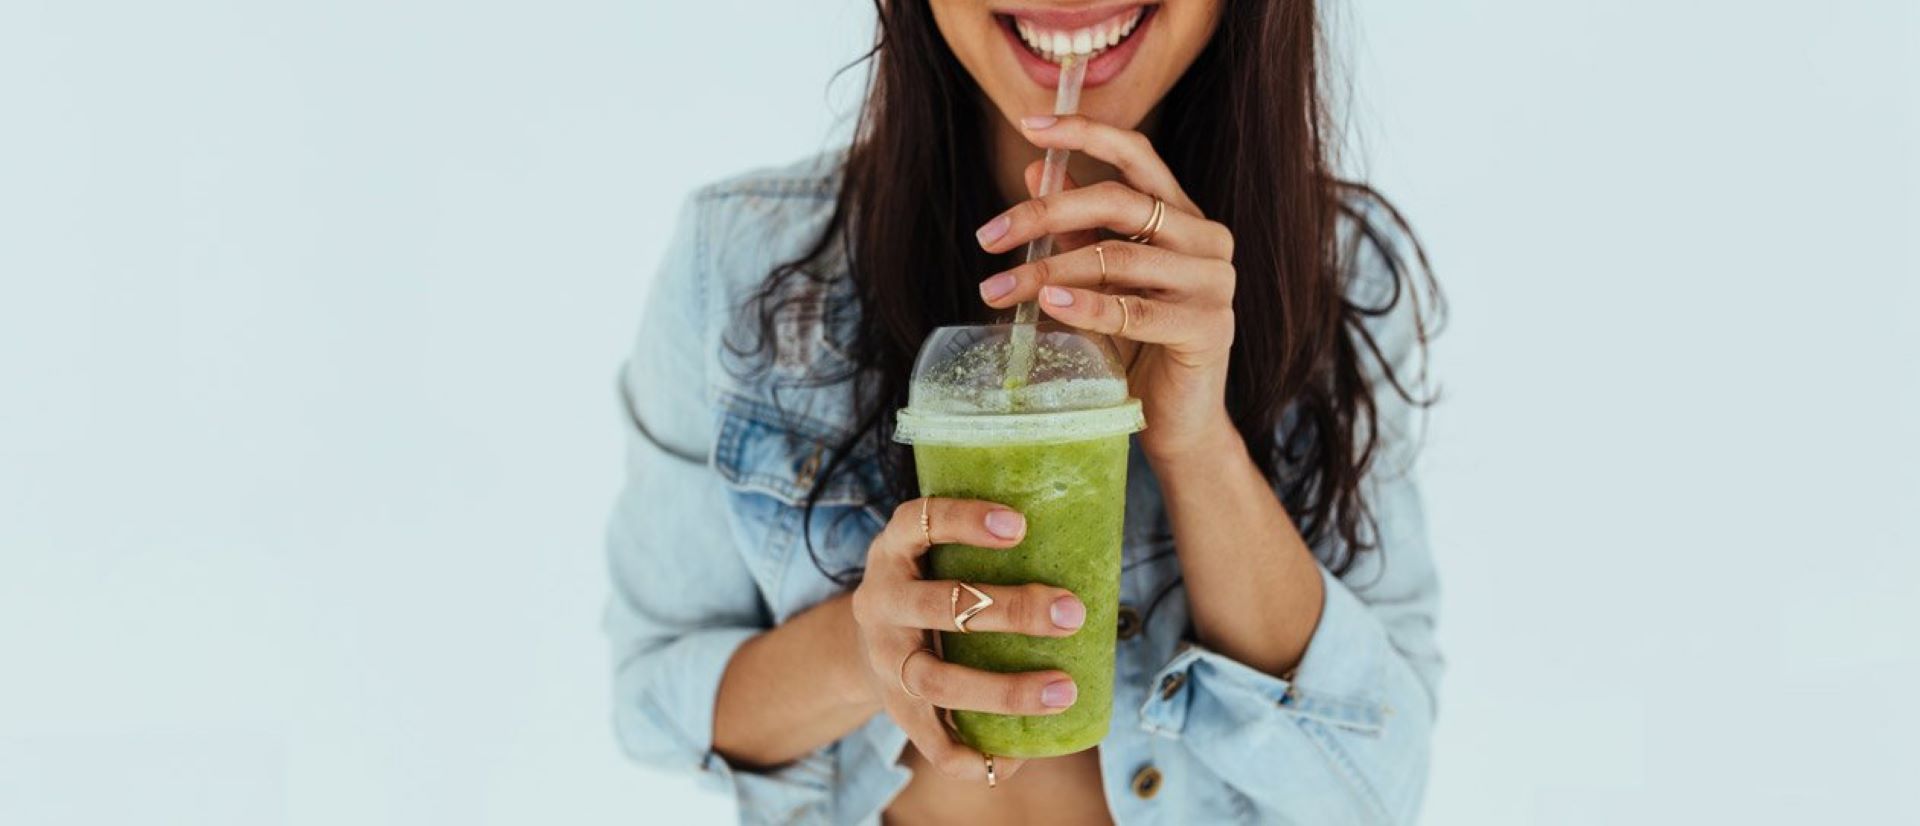 Is a juice cleanse an effective detox?